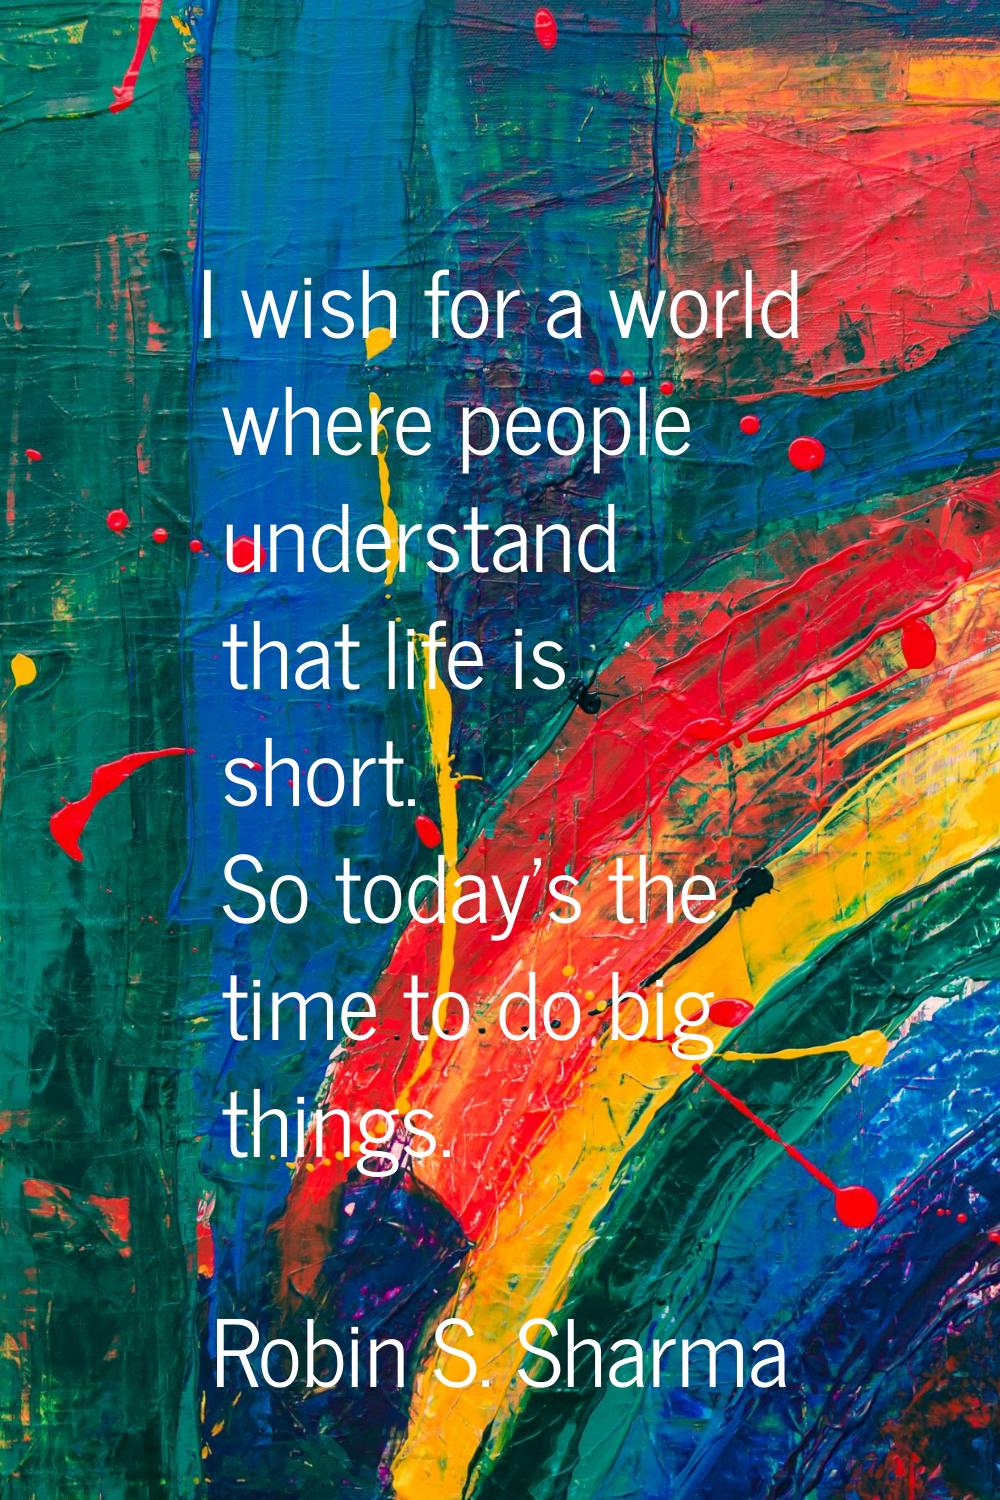 I wish for a world where people understand that life is short. So today's the time to do big things